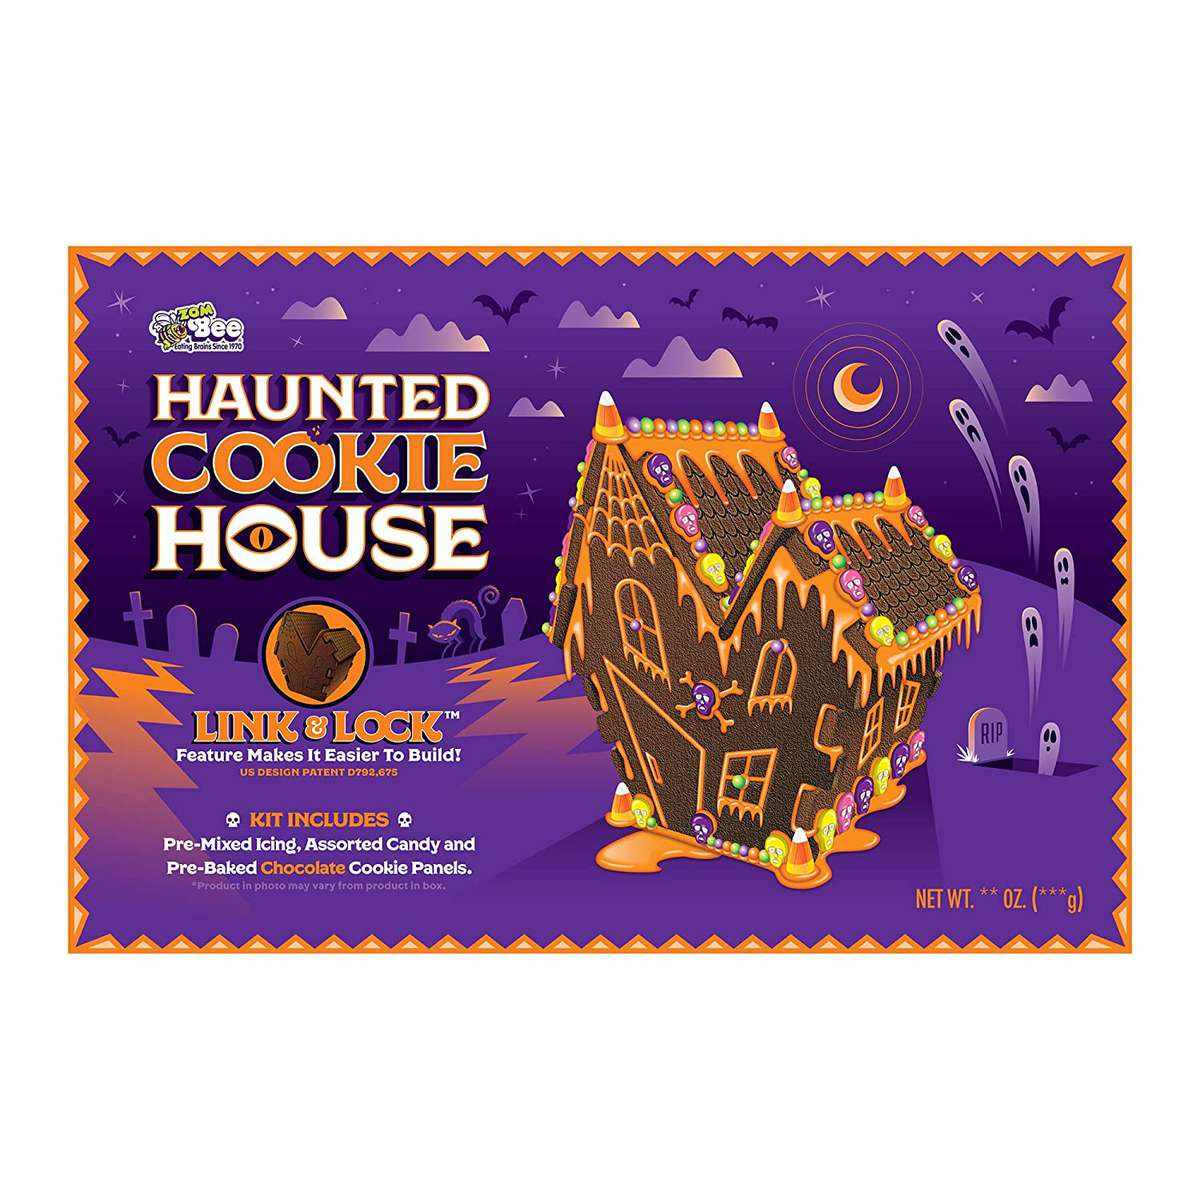 Haunted cookie house kit by Halloween Bee